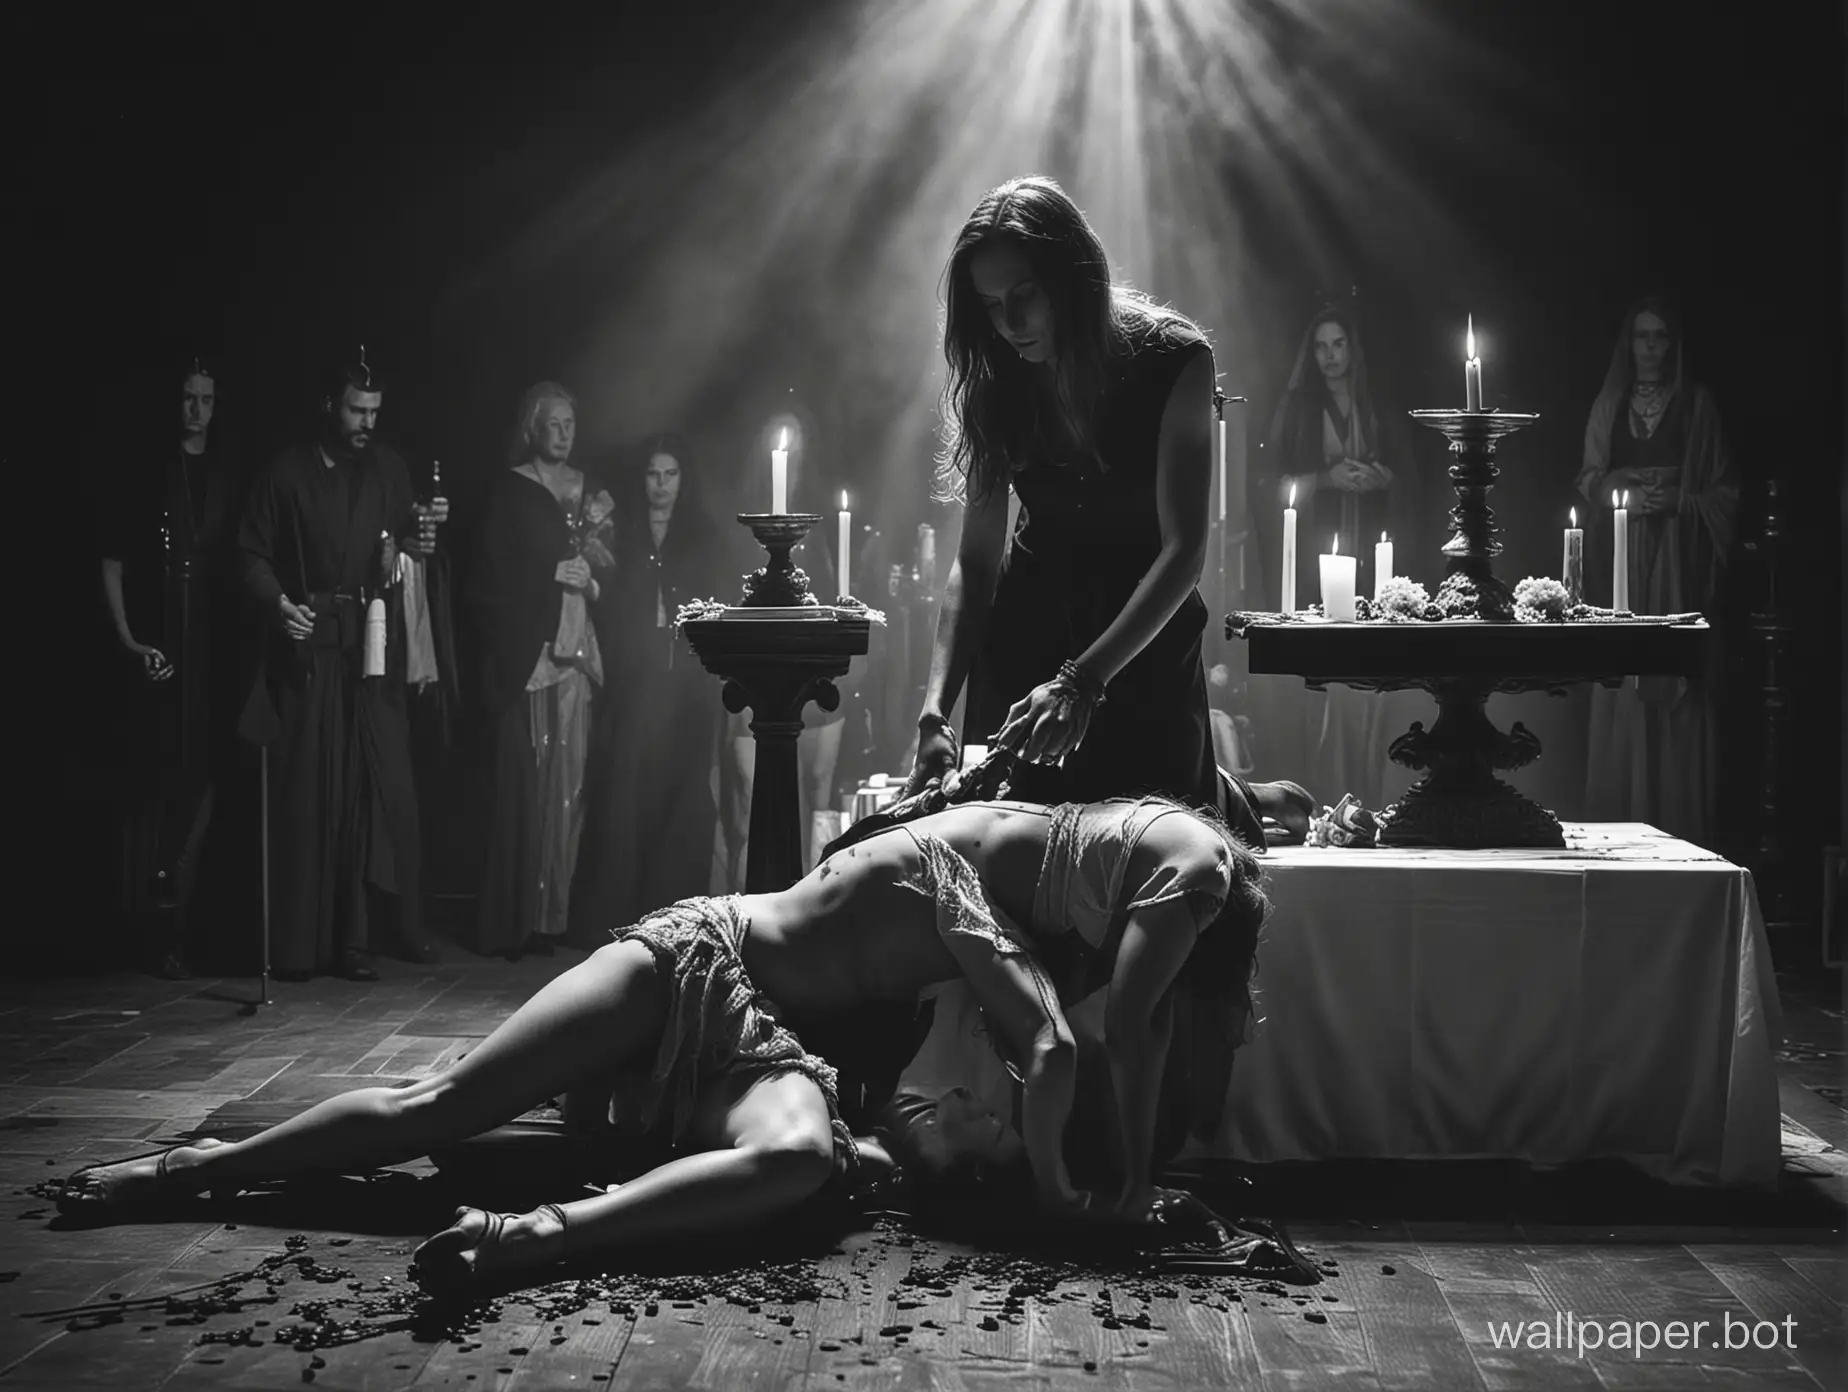 man lays woman on altar, sacrifice of a woman, girl doing satanic ritual , doing ritual in,black and white photography, high contrast photography, sharp super contrast